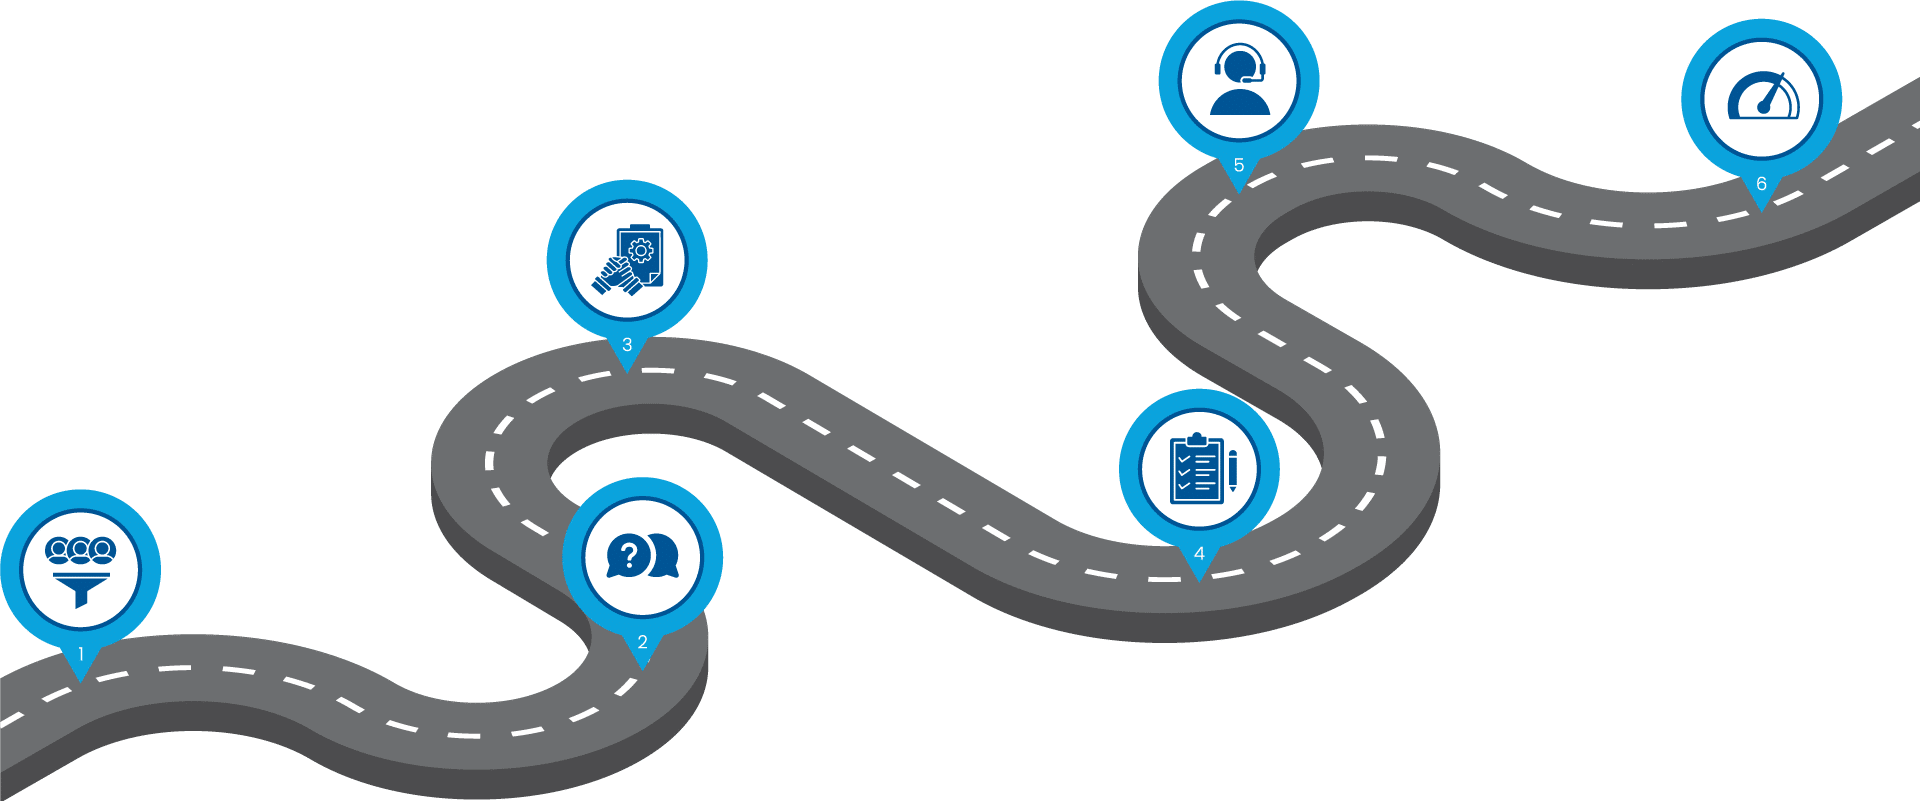 Illustration of a curvy gray road with blue and white markers. Dark blue icons represent the steps in Career Connections' staffing process: Pre-Screening, In-Person Interview, Onboarding, Assessment, In-Person Tour, and Ongoing Performance Management.